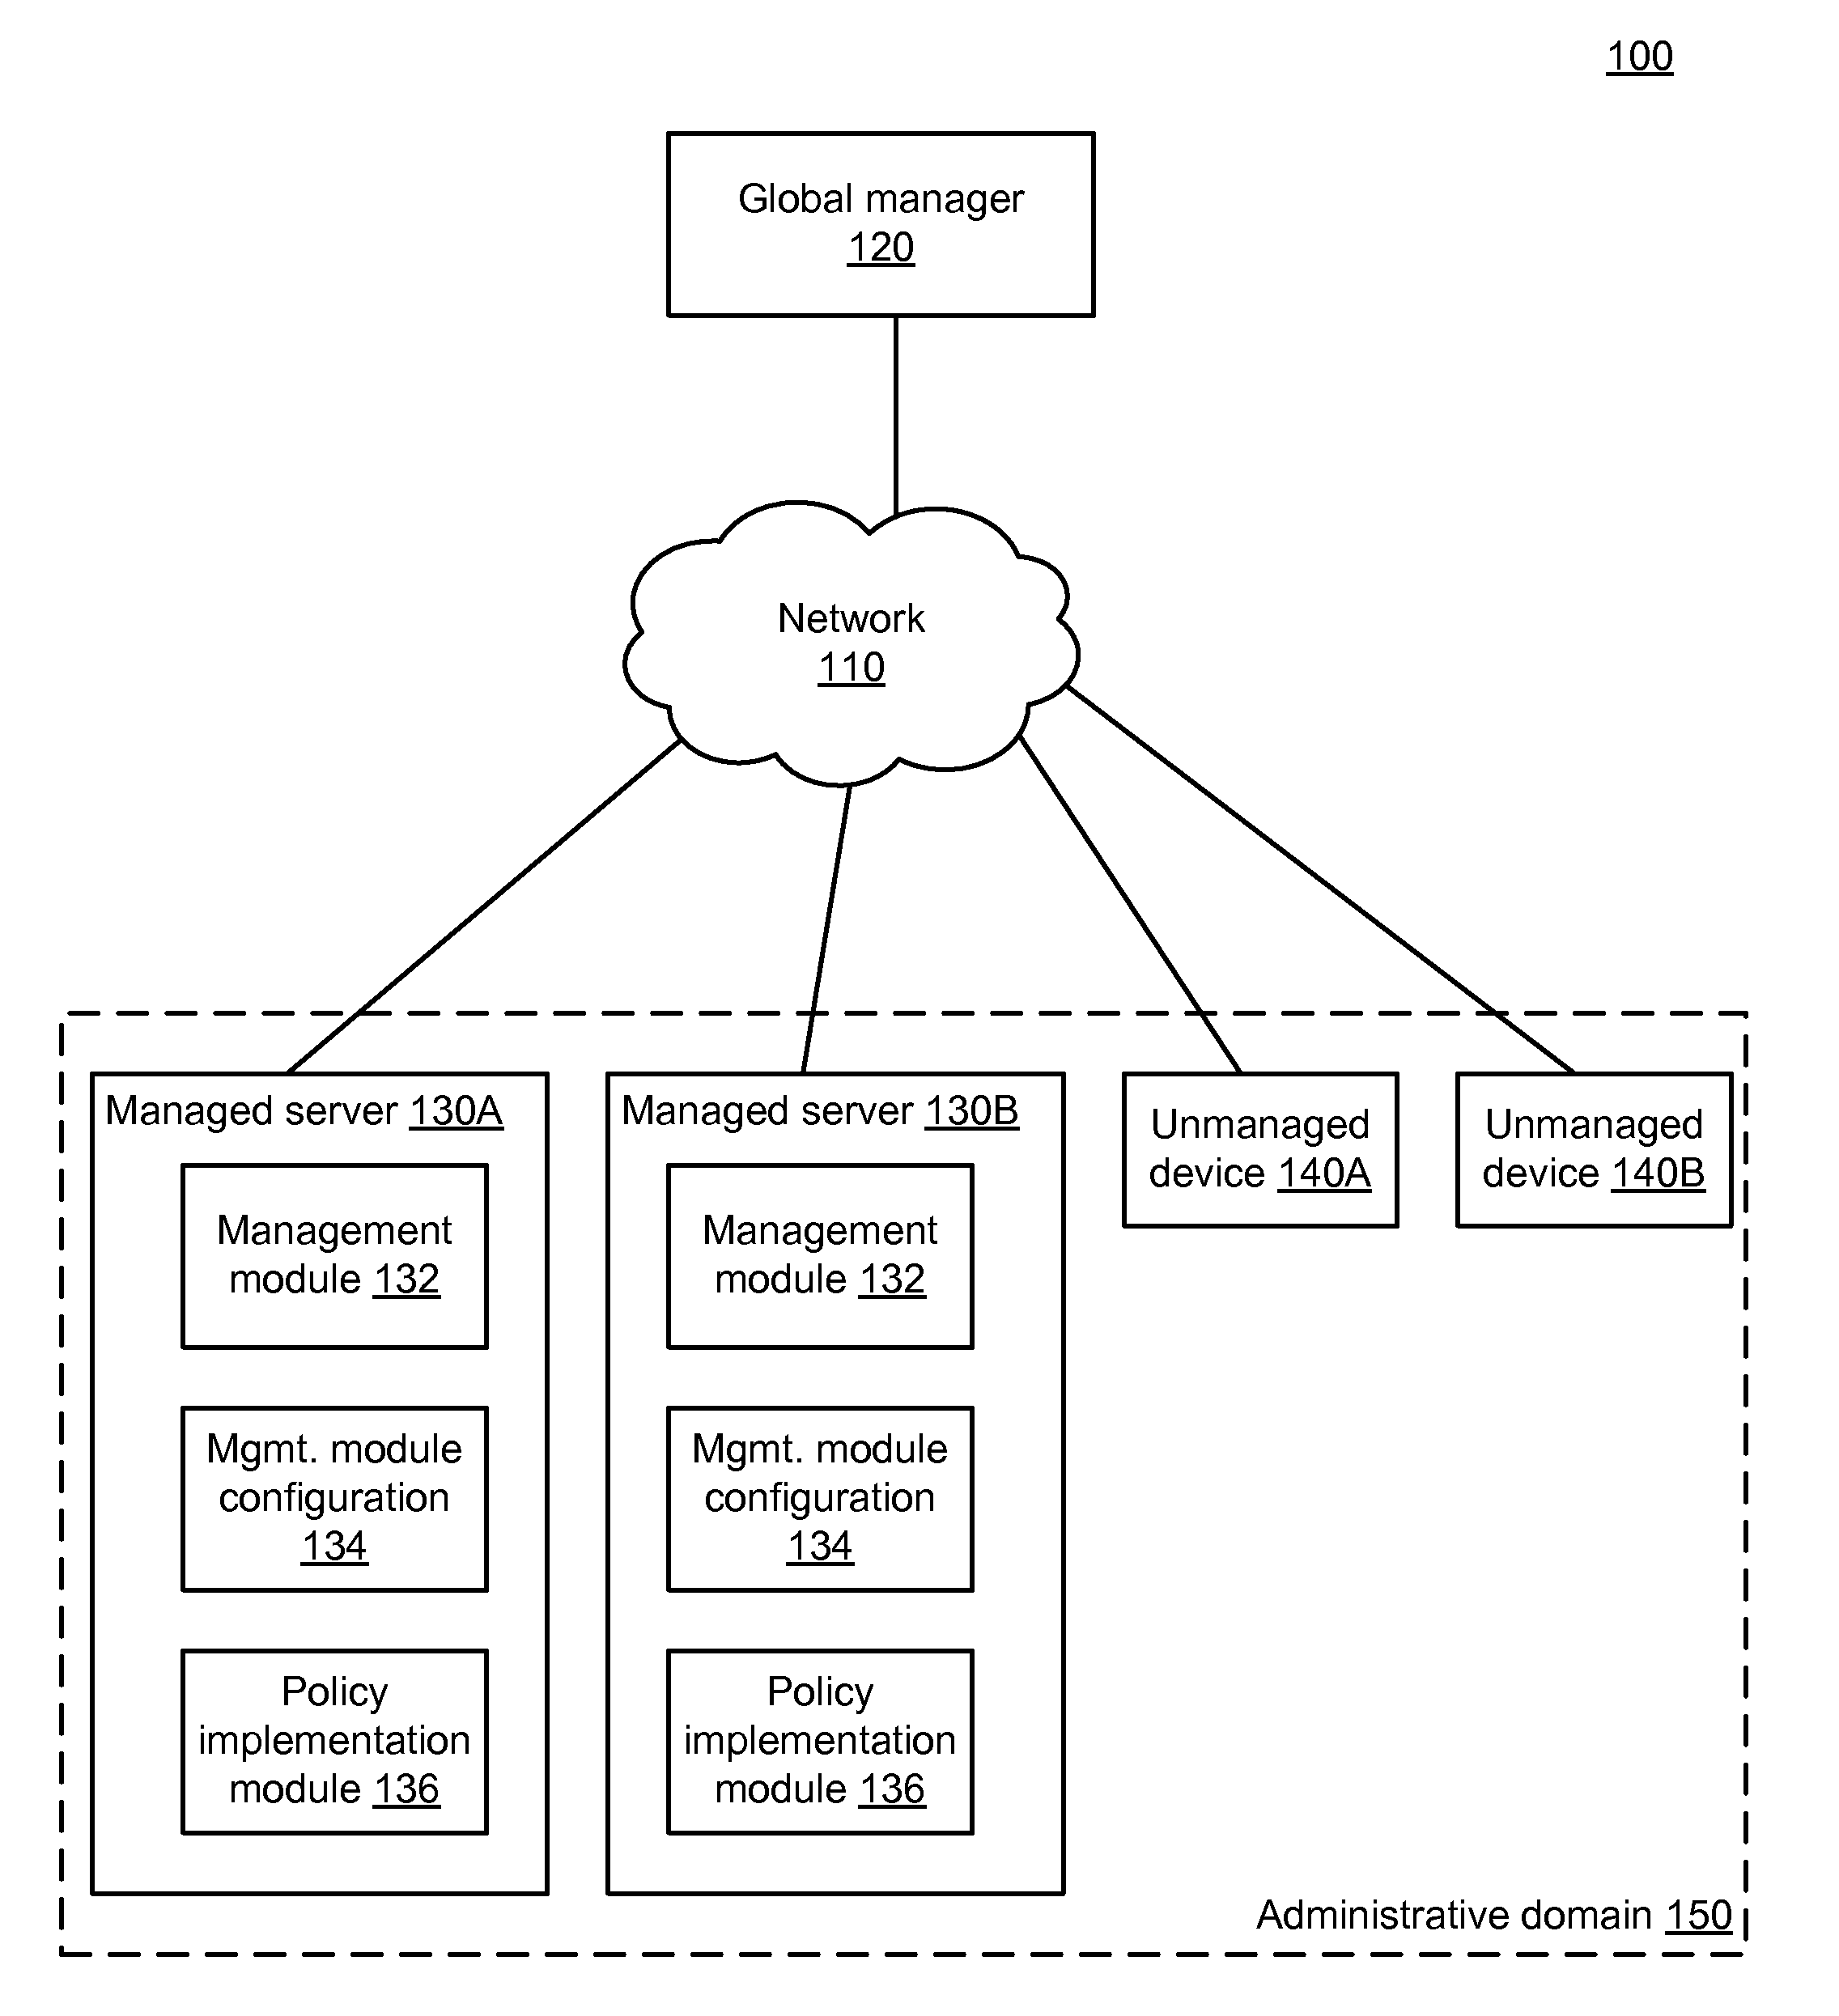 Distributed Network Security Using a Logical Multi-Dimensional Label-Based Policy Model